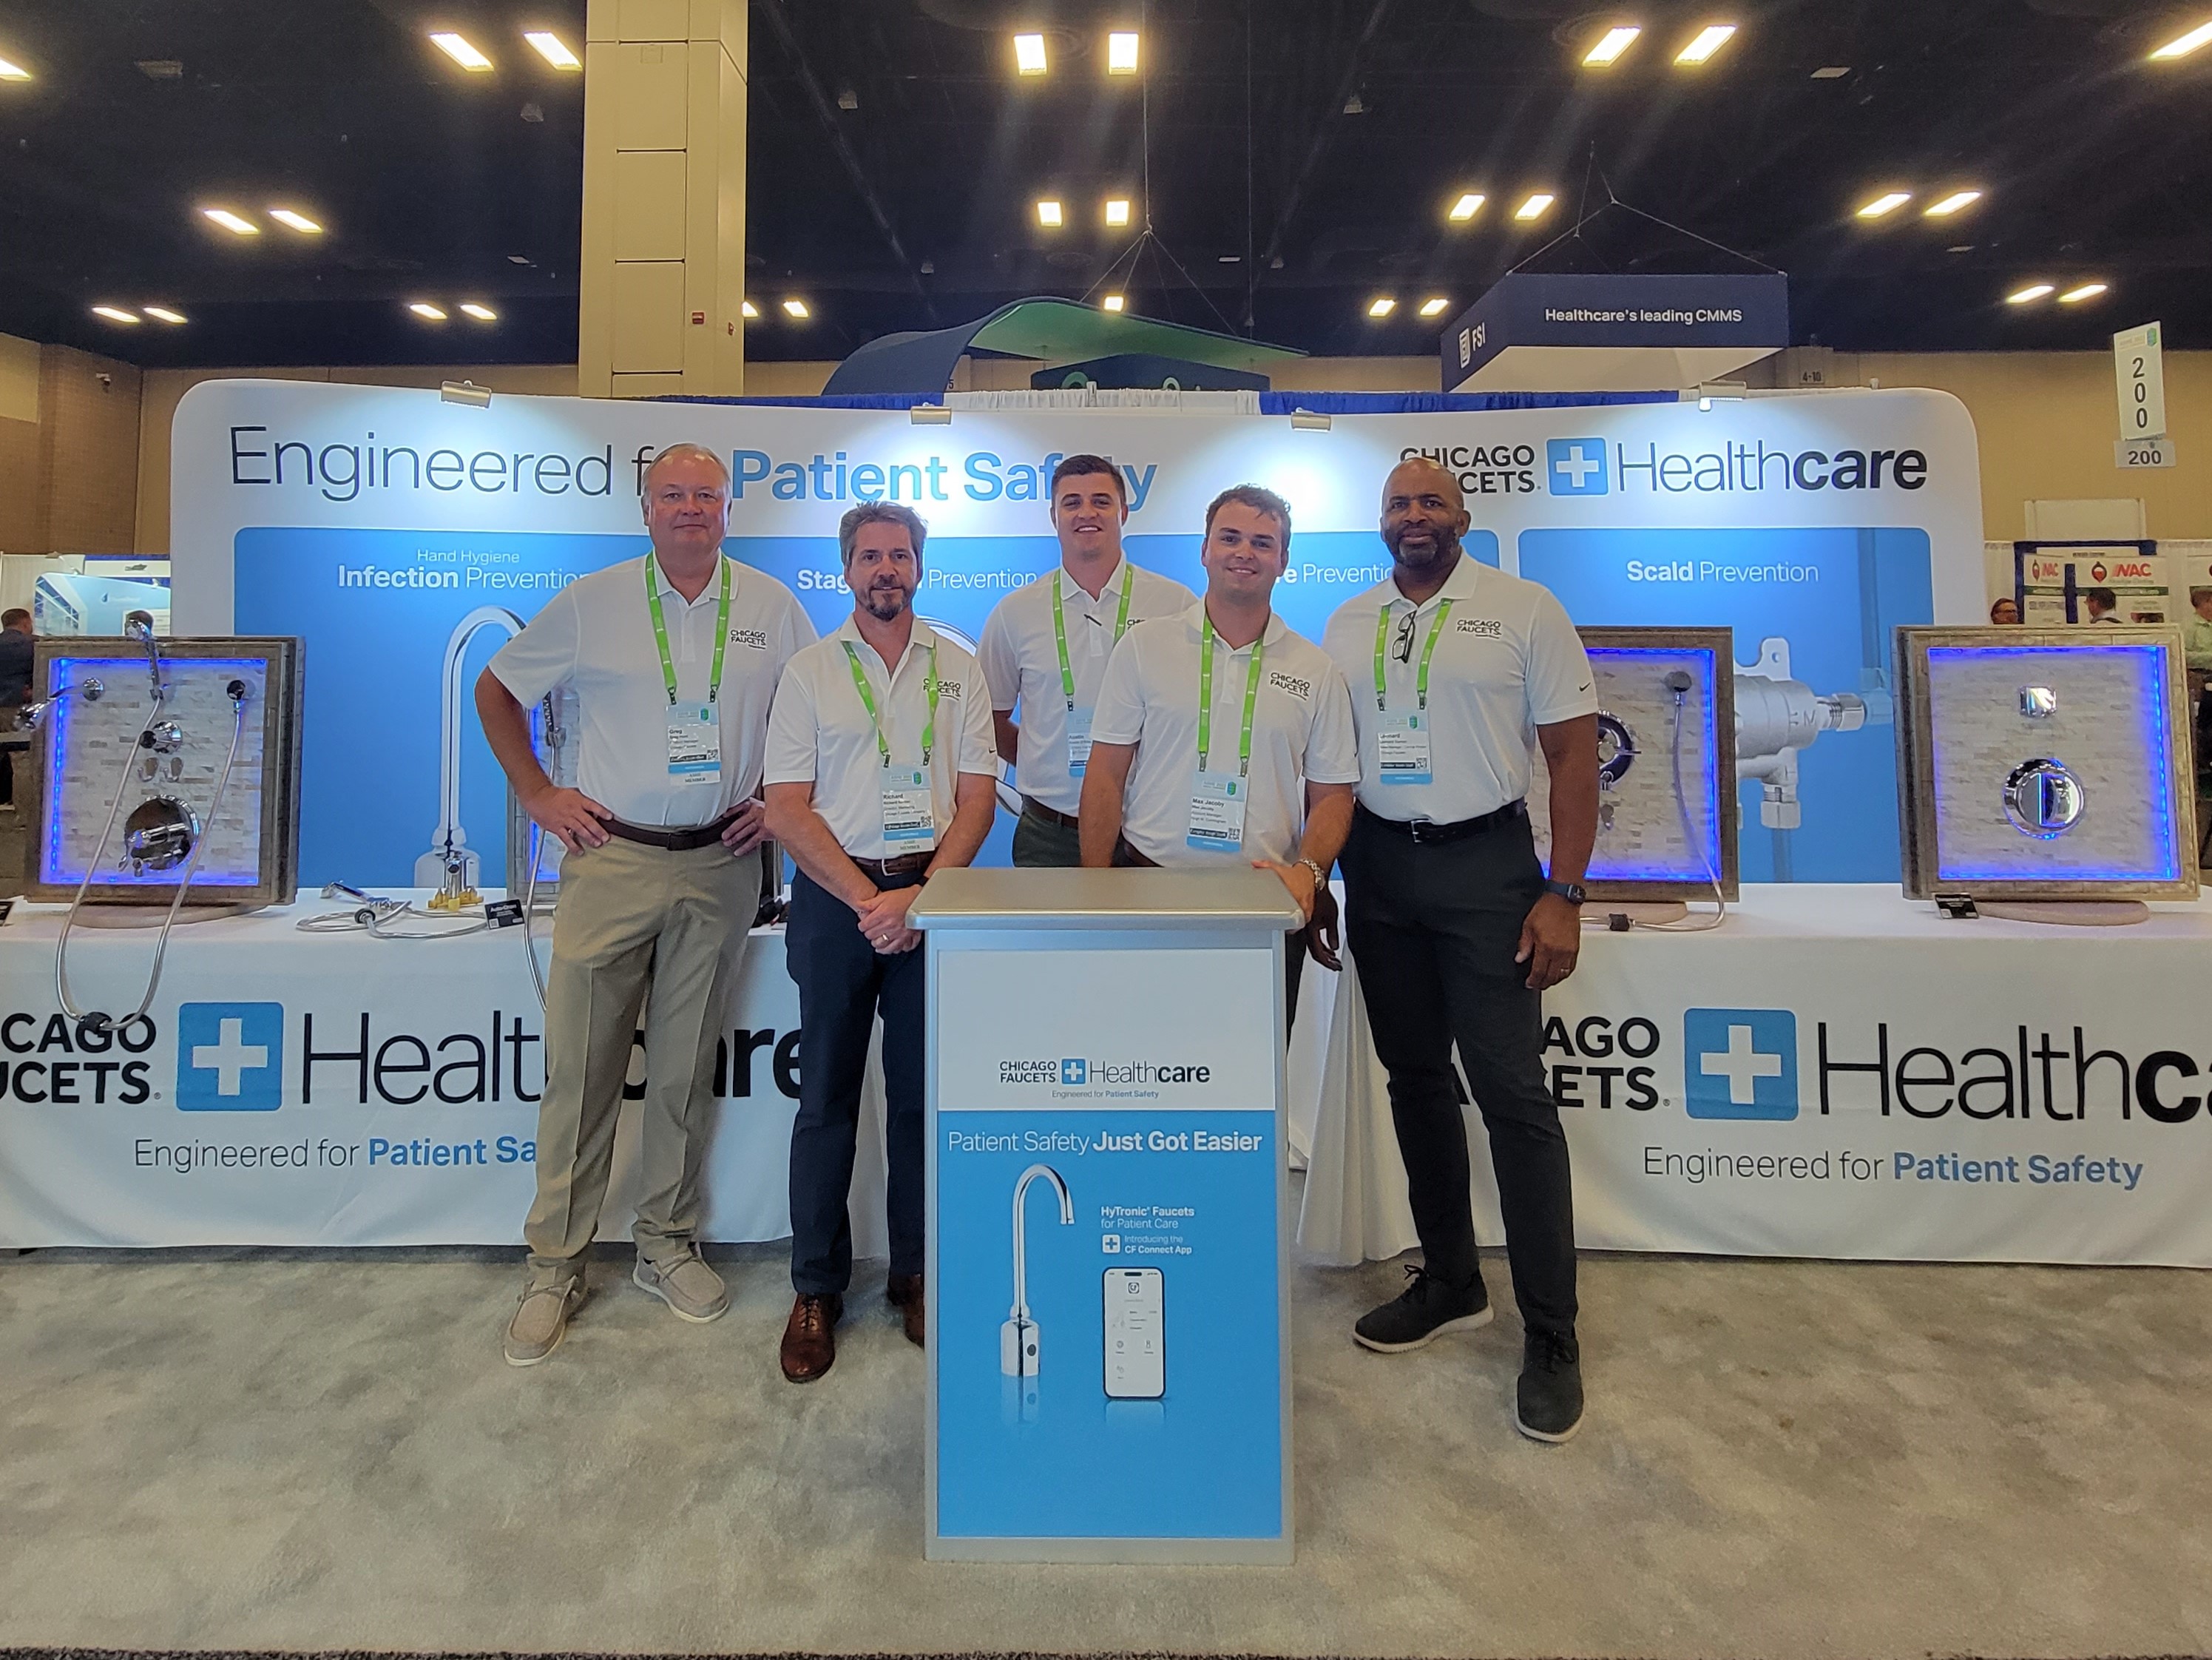 booth staff standing at Chicago Faucets + Healthcare booth